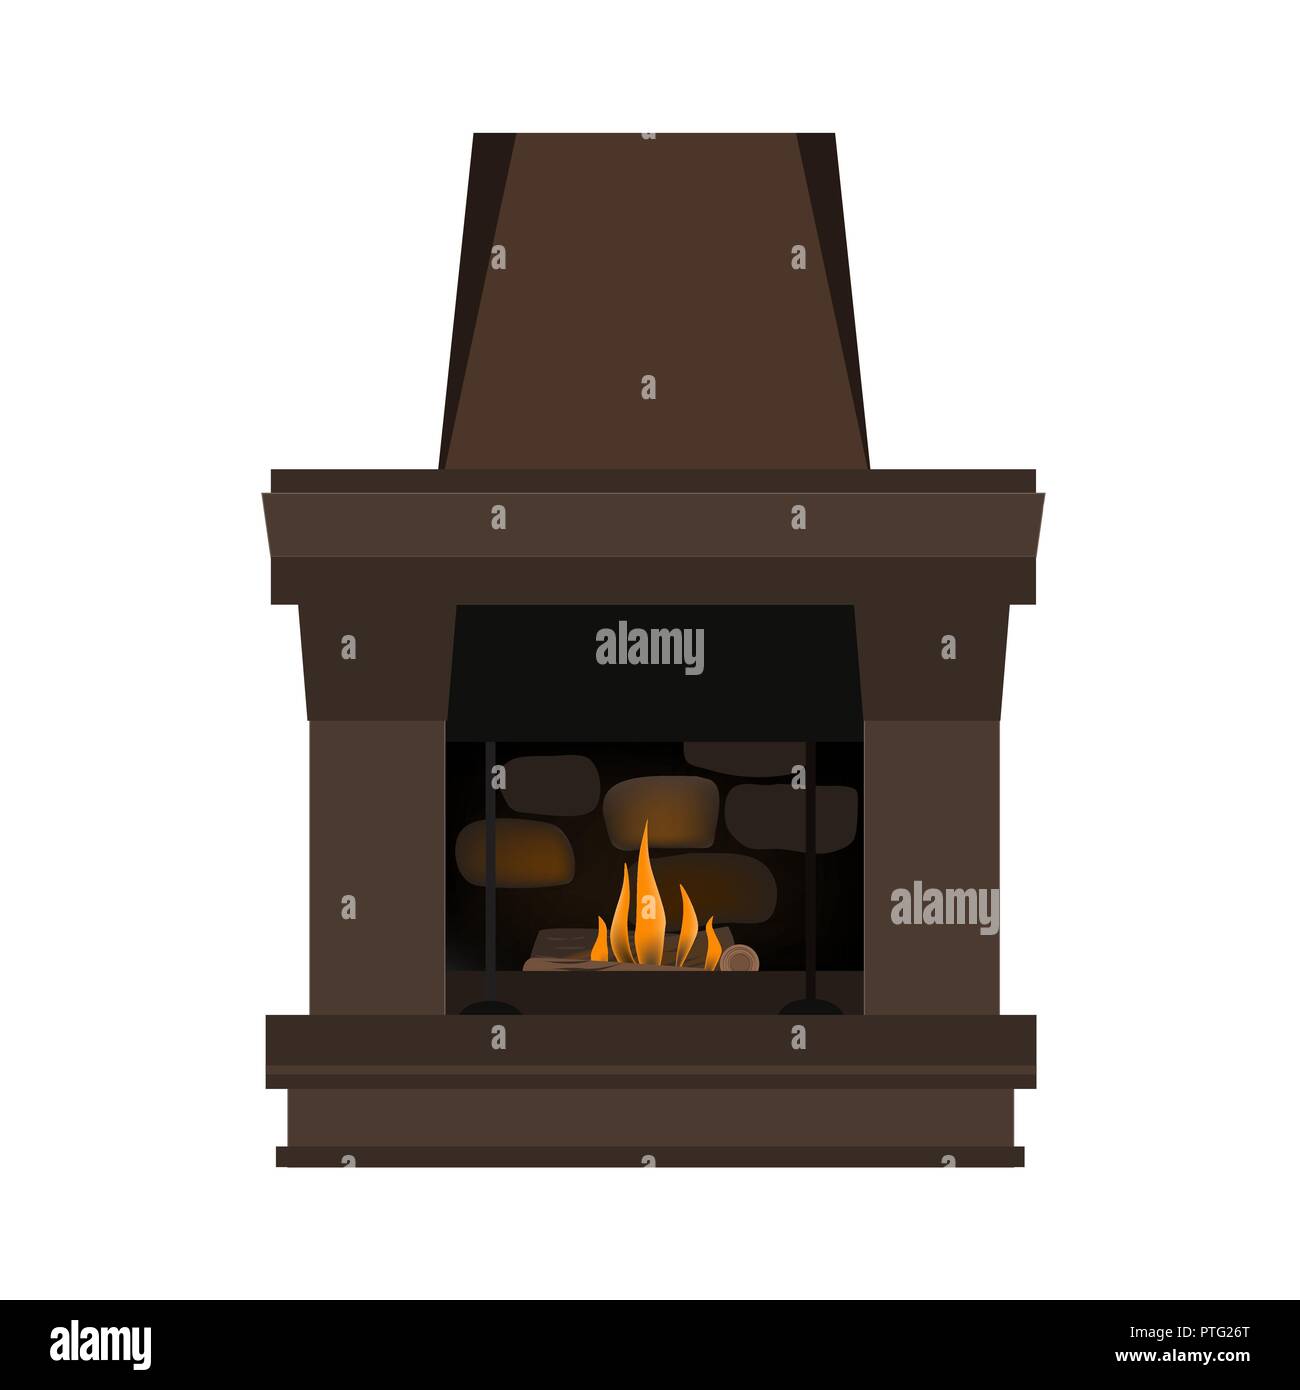 Fireplace in Danish hygge style - cozy and comfortable. Burning flame inside and brown wood frame construction. Vector illustration in realistic style Stock Vector